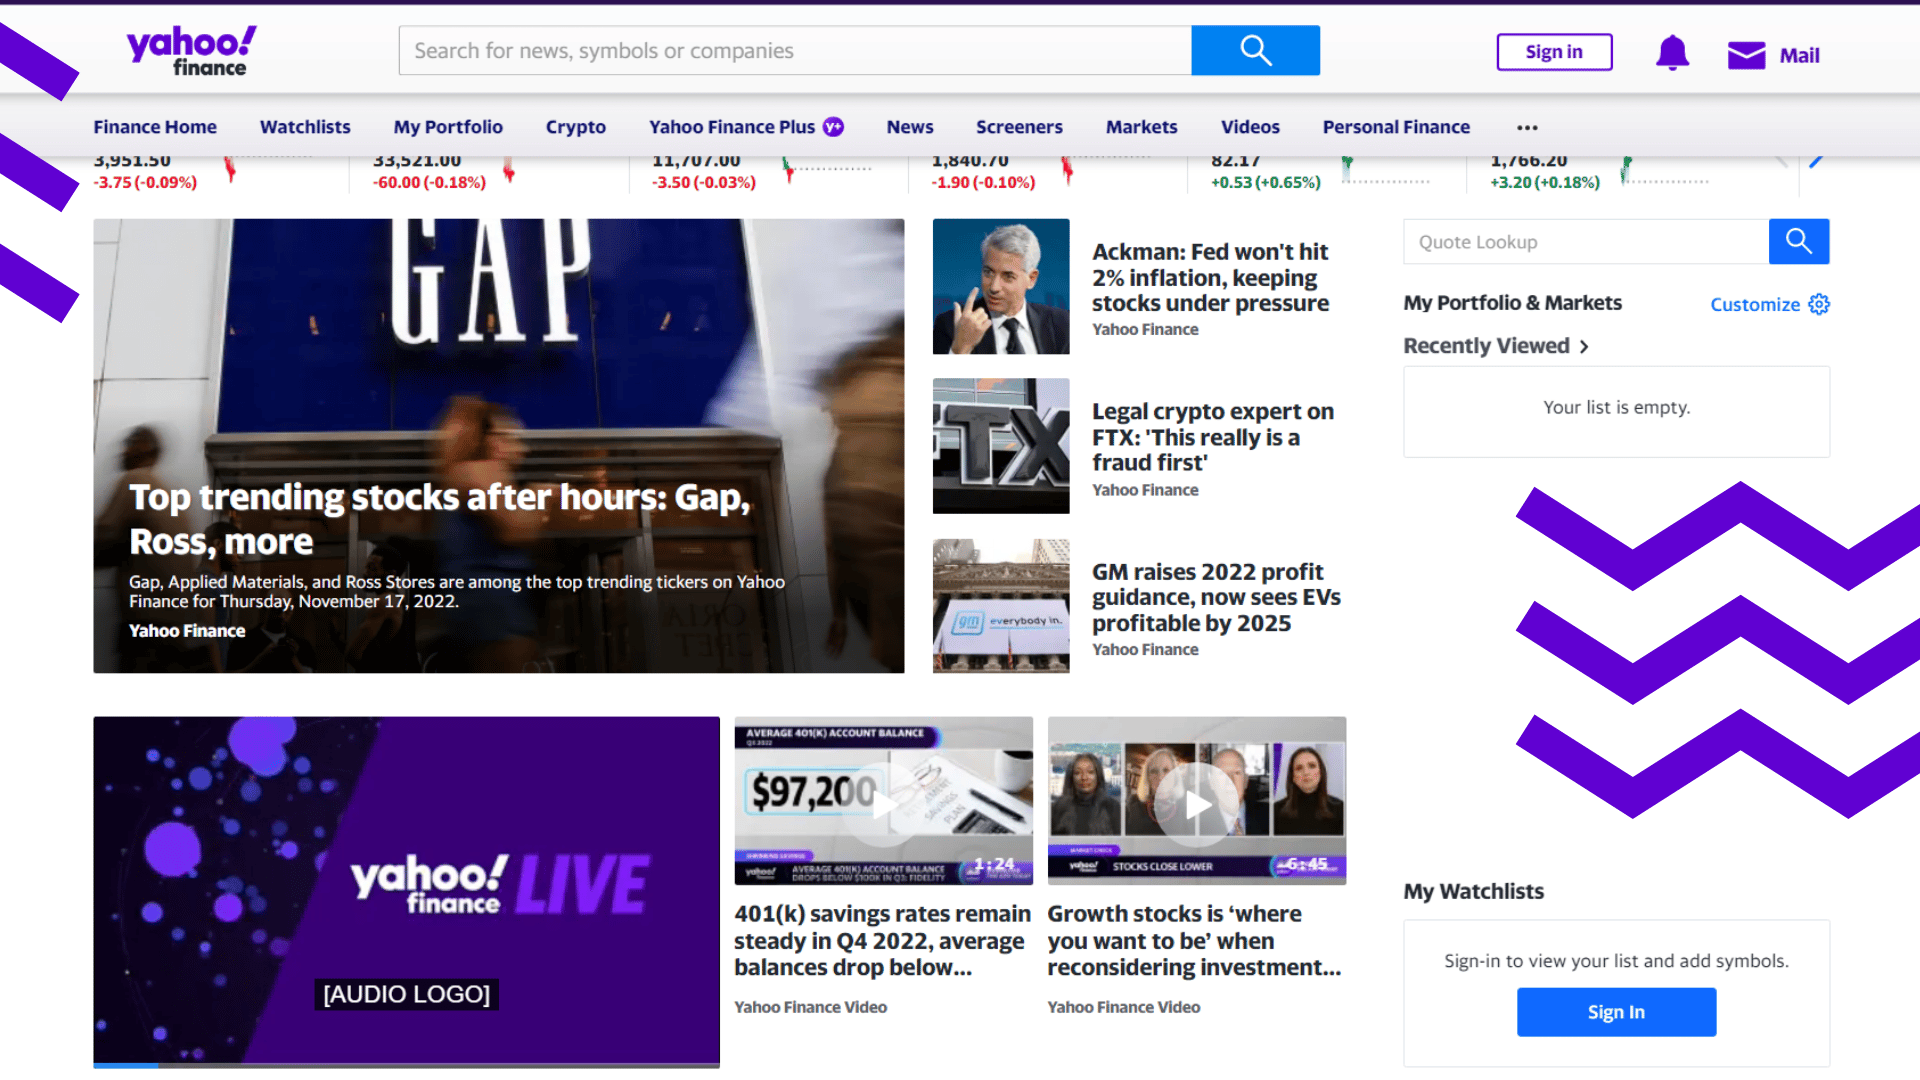 Yahoo! Finance Features